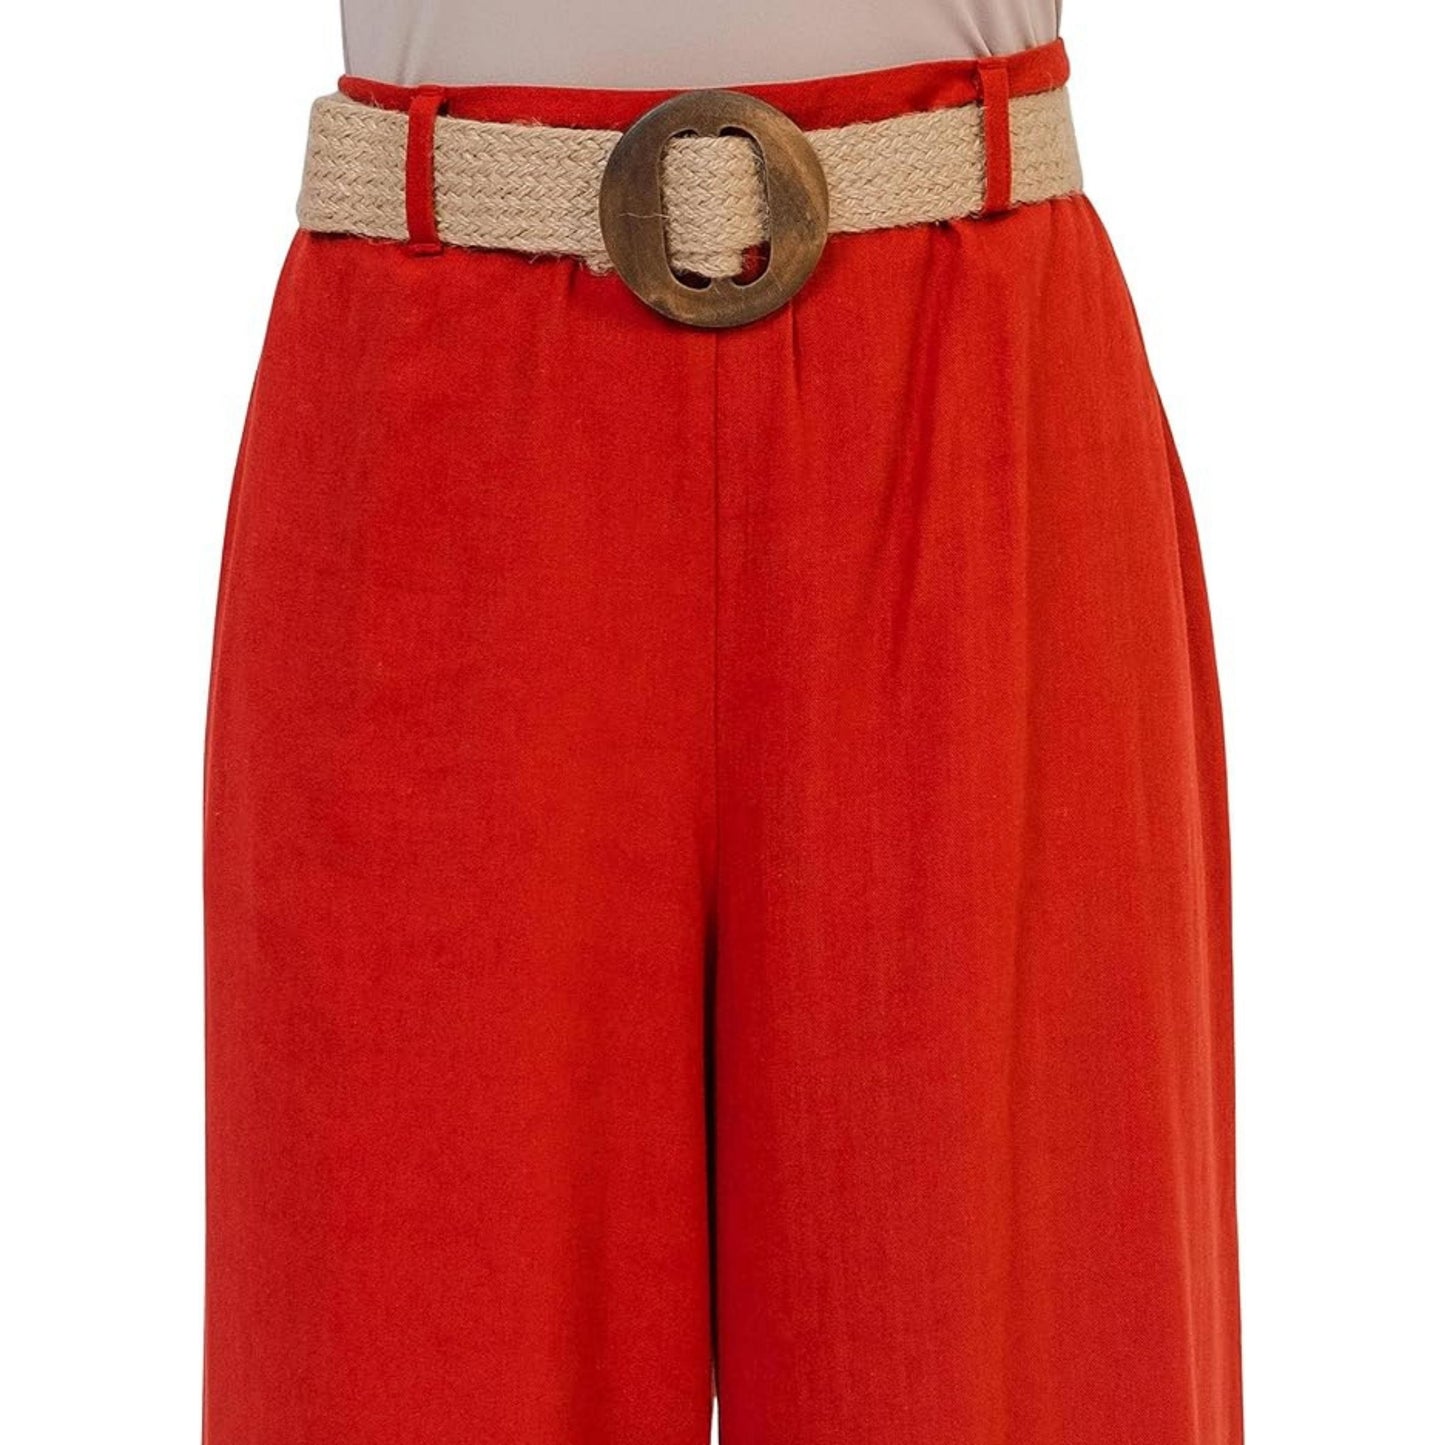 WOMENS SIZE 18 RED NWT VENEZIA BELTED CAPRIS